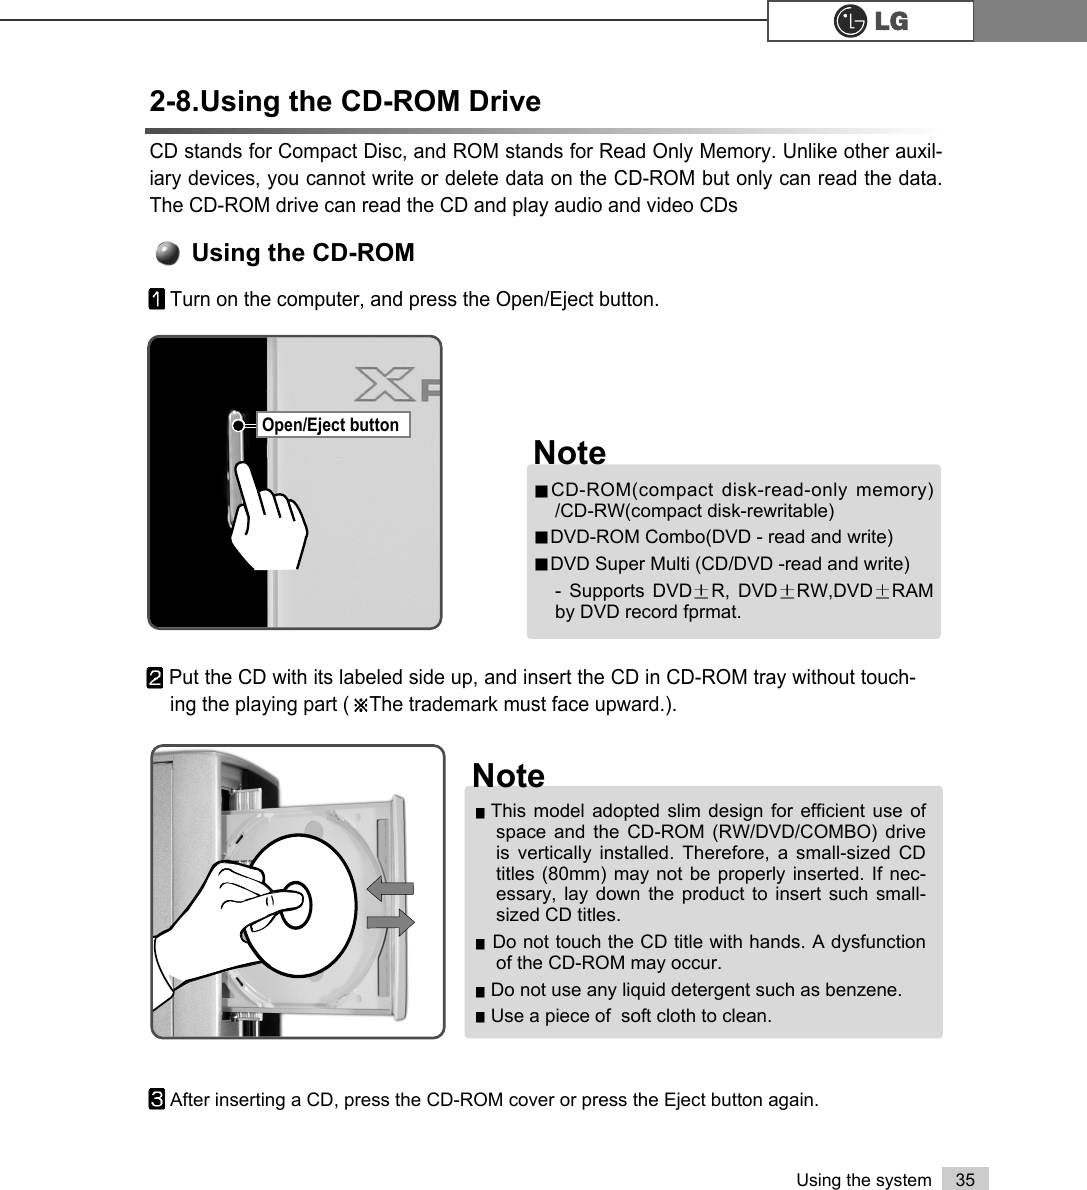 35Using the systemCD stands for Compact Disc, and ROM stands for Read Only Memory. Unlike other auxil-iary devices, you cannot write or delete data on the CD-ROM but only can read the data.The CD-ROM drive can read the CD and play audio and video CDs2-8.Using the CD-ROM DriveUsing the CD-ROMTurn on the computer, and press the Open/Eject button.Put the CD with its labeled side up, and insert the CD in CD-ROM tray without touch-ing the playing part ( The trademark must face upward.). After inserting a CD, press the CD-ROM cover or press the Eject button again.CD-ROM(compact disk-read-only memory)/CD-RW(compact disk-rewritable)DVD-ROM Combo(DVD - read and write)DVD Super Multi (CD/DVD -read and write)- Supports DVD R, DVD RW,DVD RAMby DVD record fprmat.NoteThis model adopted slim design for efficient use ofspace and the CD-ROM (RW/DVD/COMBO) driveis vertically installed. Therefore, a small-sized CDtitles (80mm) may not be properly inserted. If nec-essary, lay down the product to insert such small-sized CD titles.Do not touch the CD title with hands. A dysfunctionof the CD-ROM may occur.Do not use any liquid detergent such as benzene.Use a piece of  soft cloth to clean.NoteOpen/Eject button